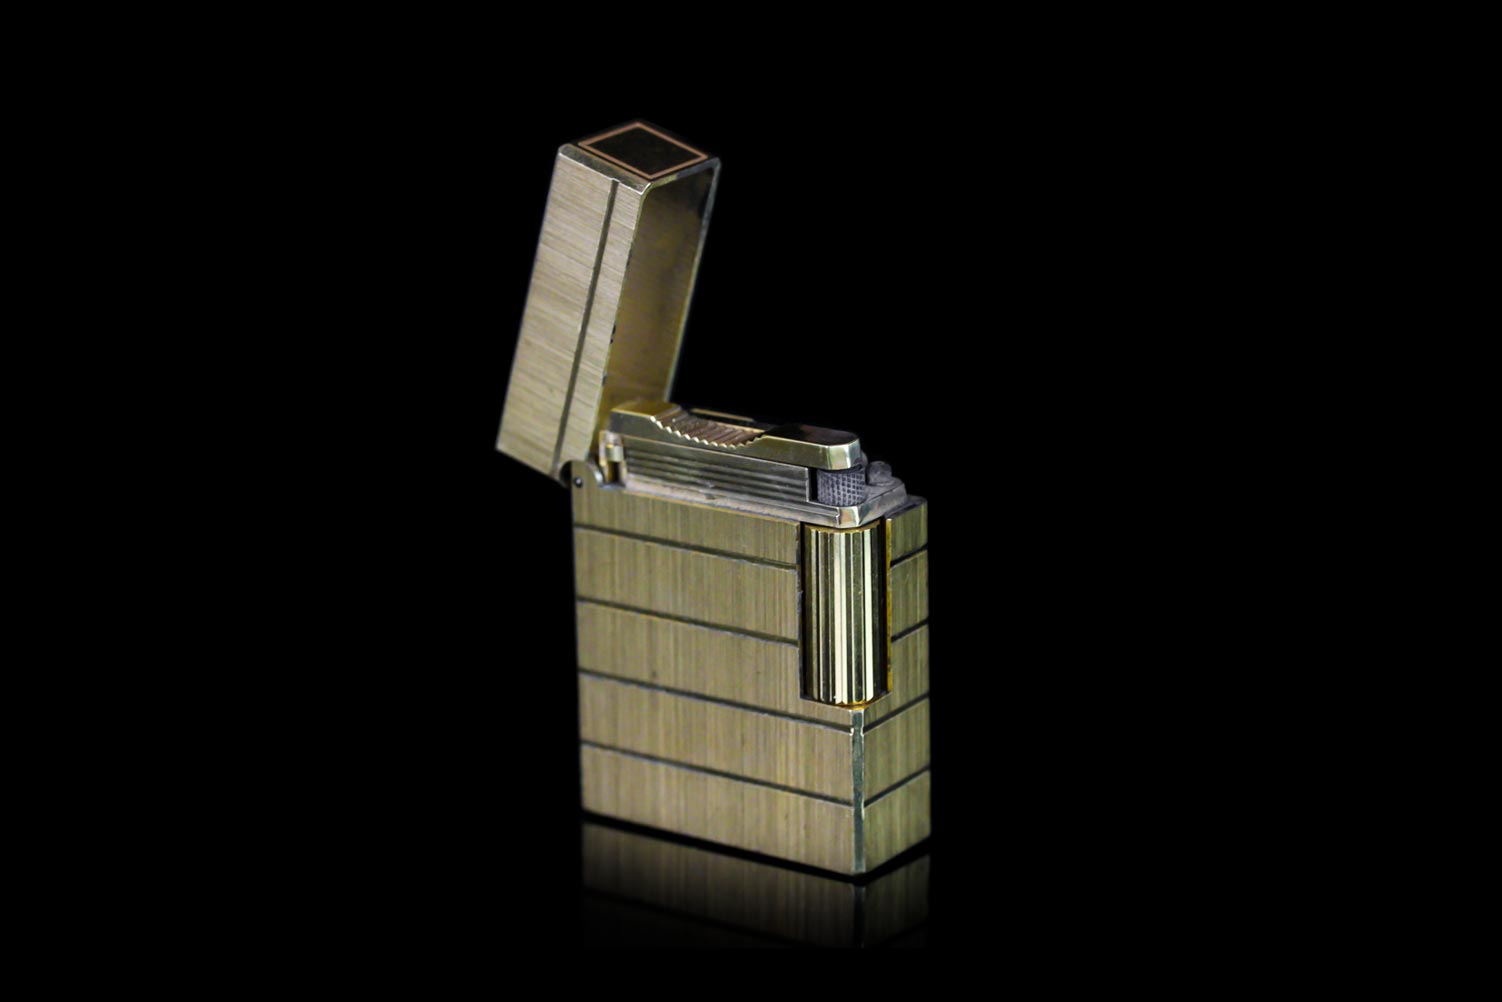 GENTLEMANS CLASSIC DUPONT 1L 5AP43, gold plated, lighter is currently working.